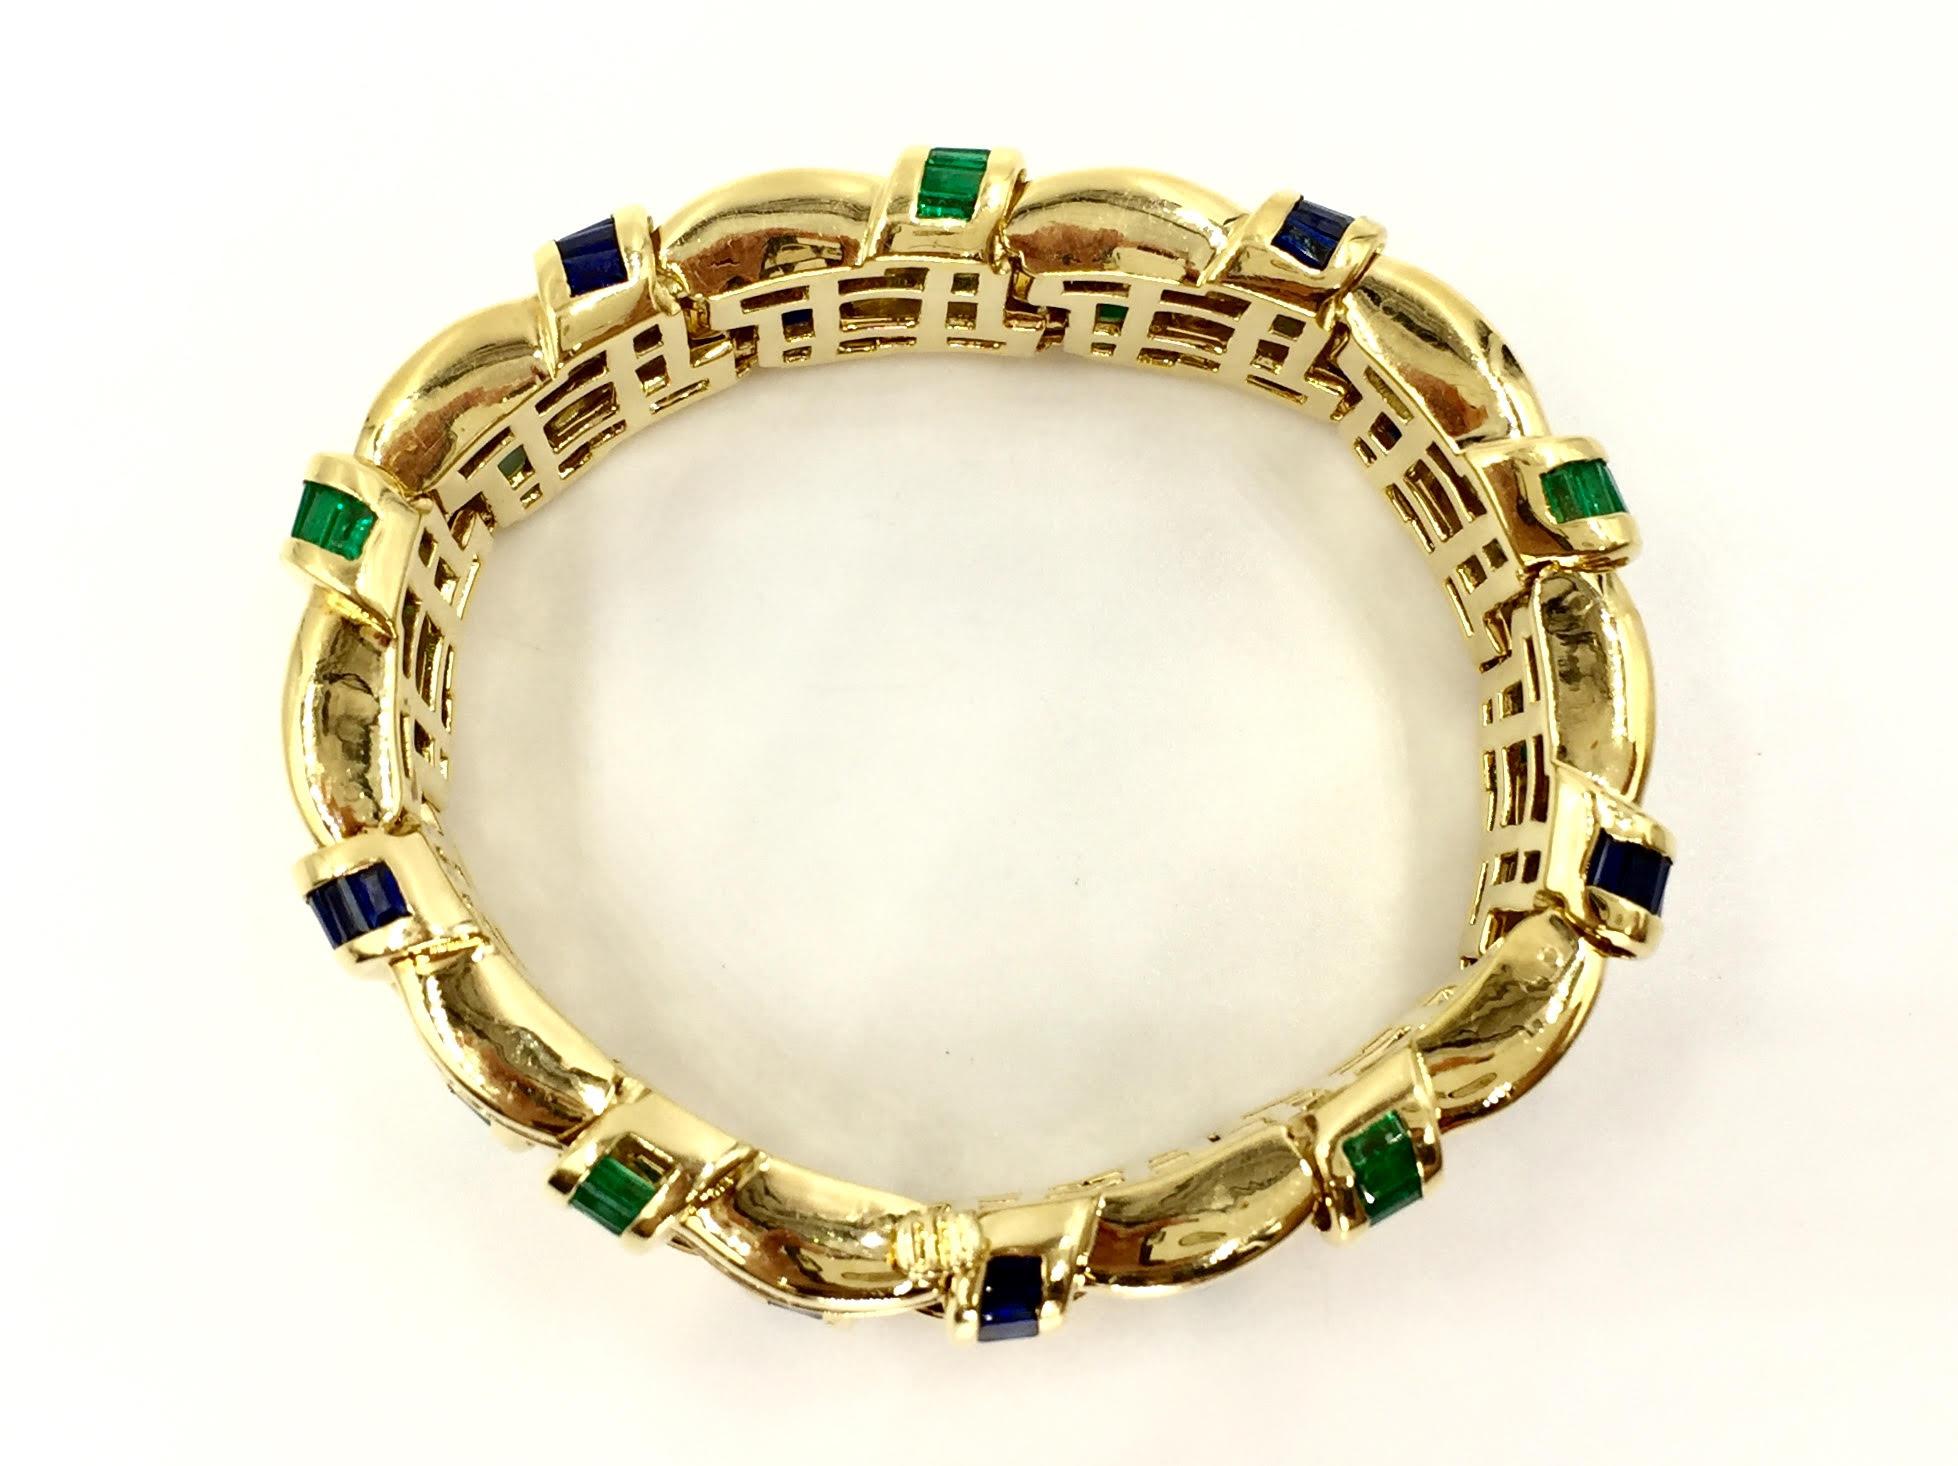 Diamond, Sapphire and Emerald Wide 18 Karat Bracelet by Charles Krypell For Sale 1